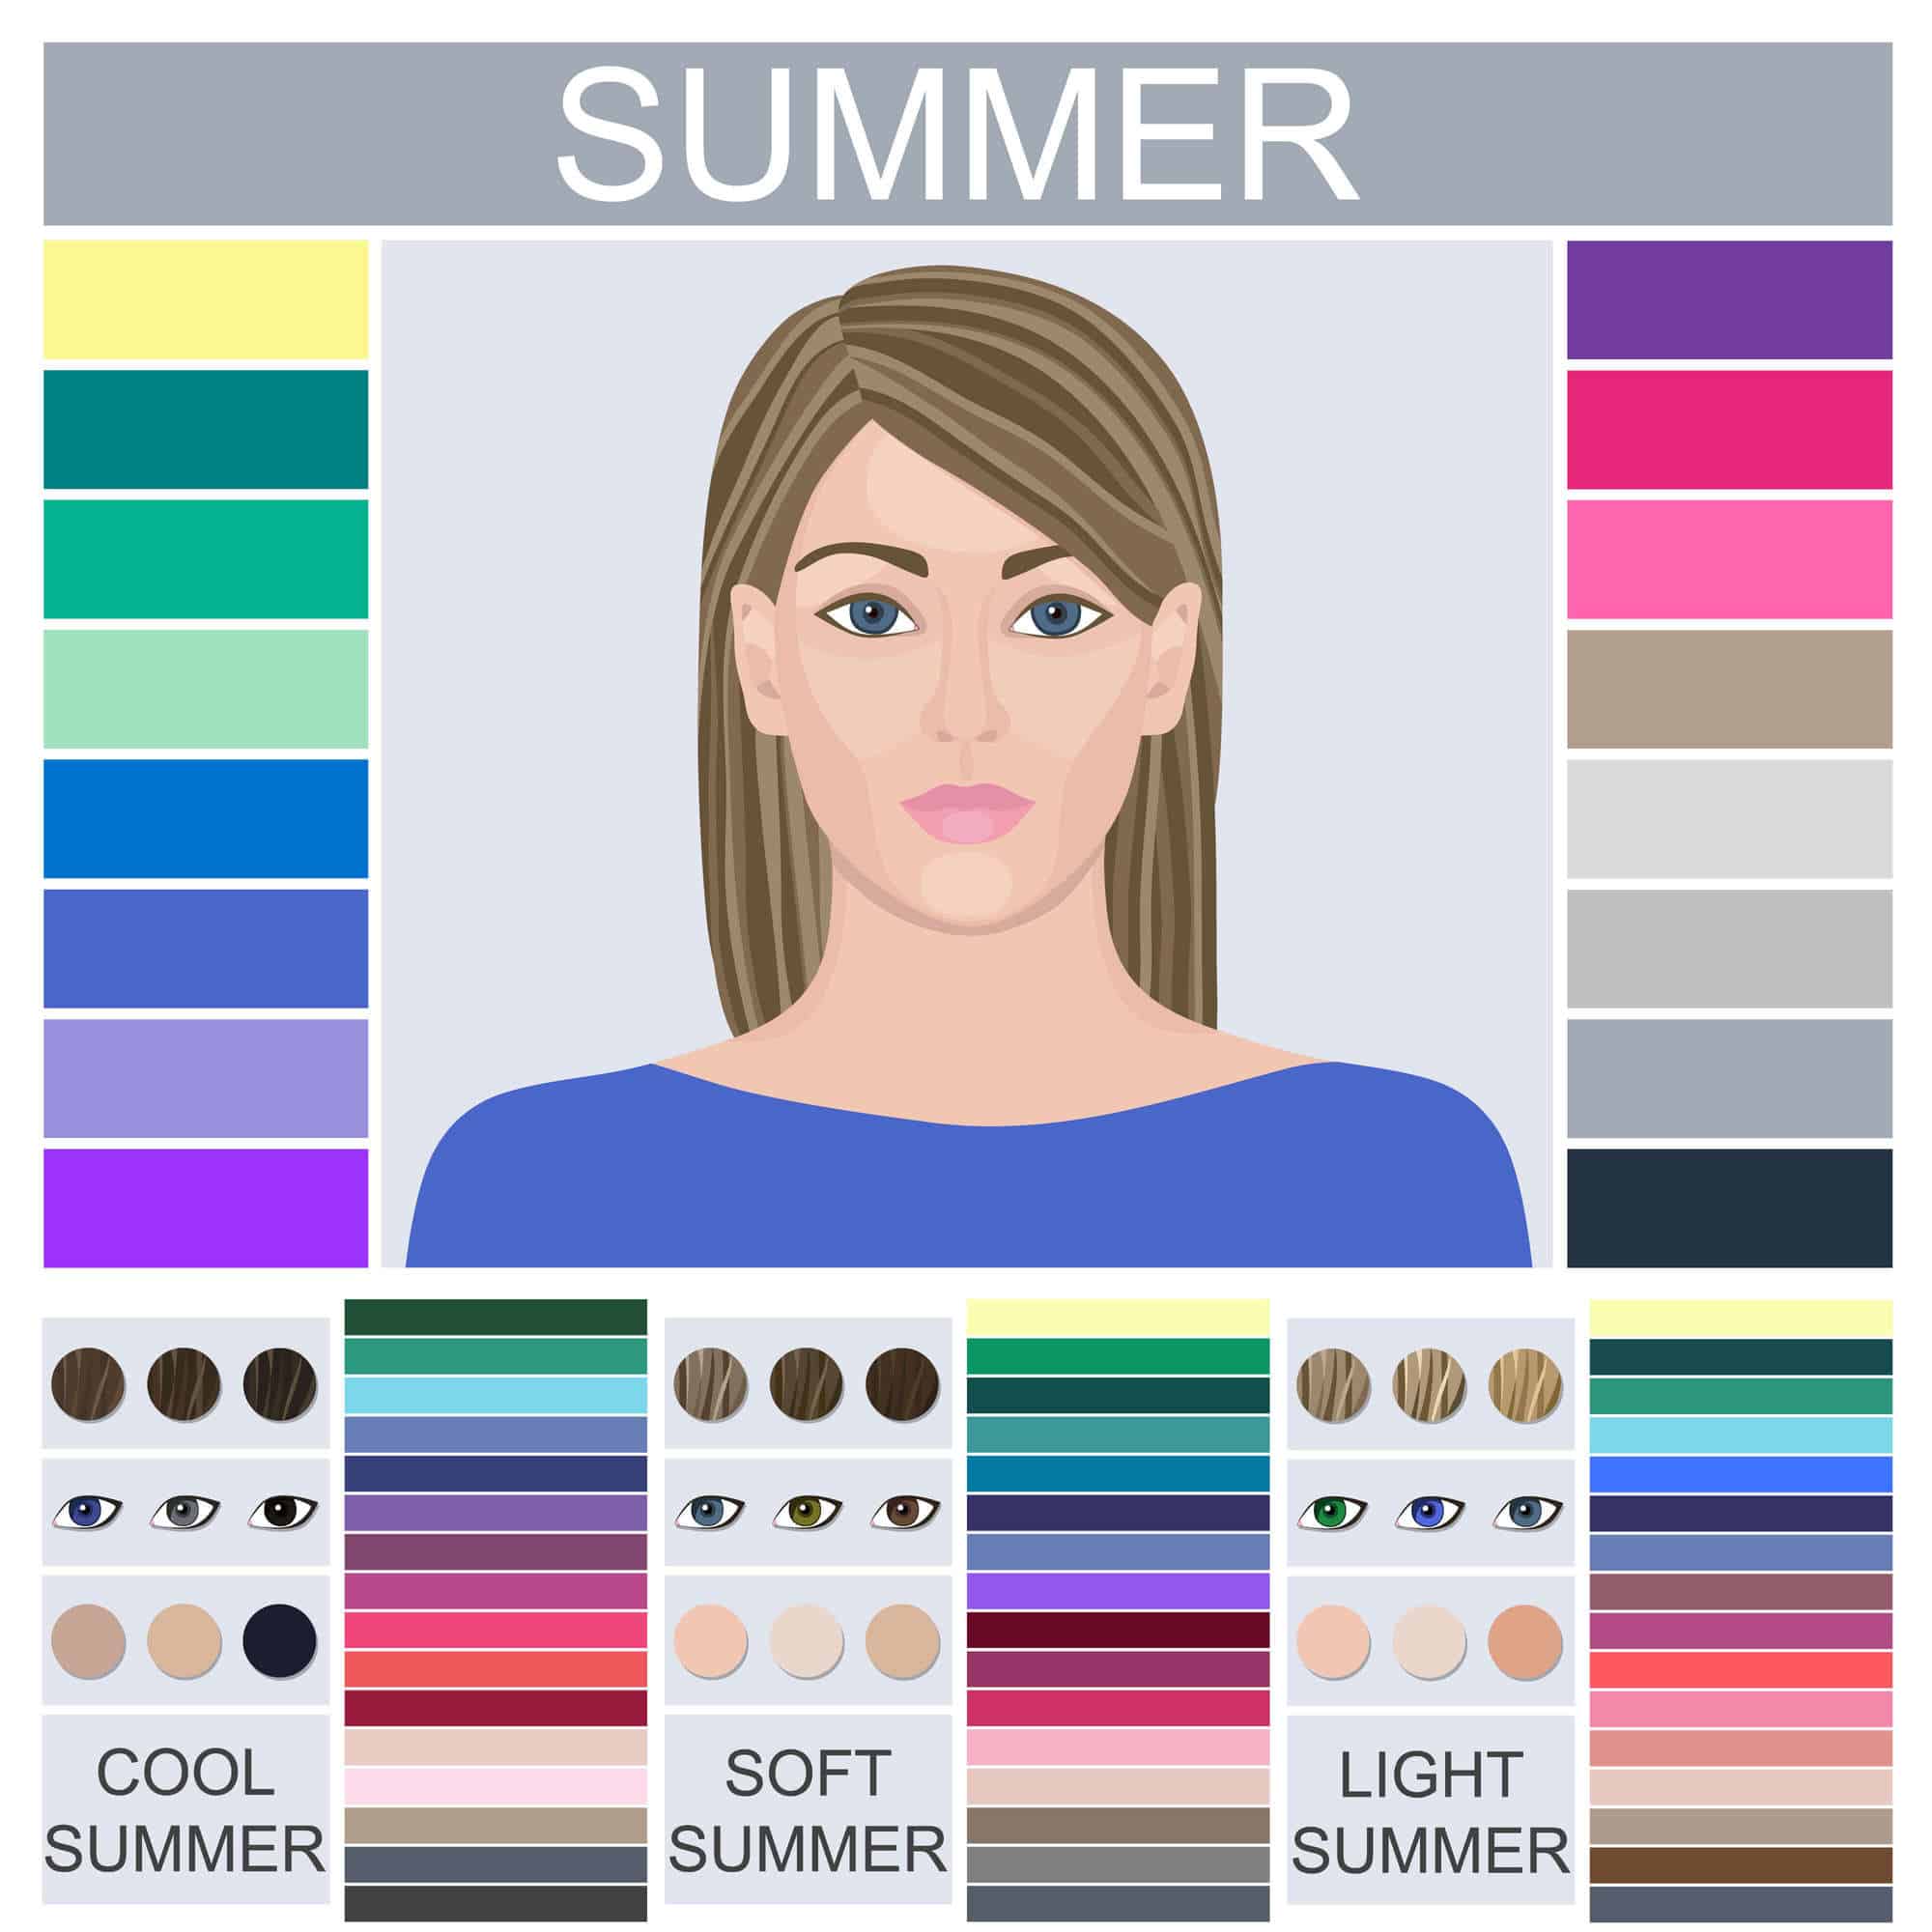 How to match summer color tone with jewelry